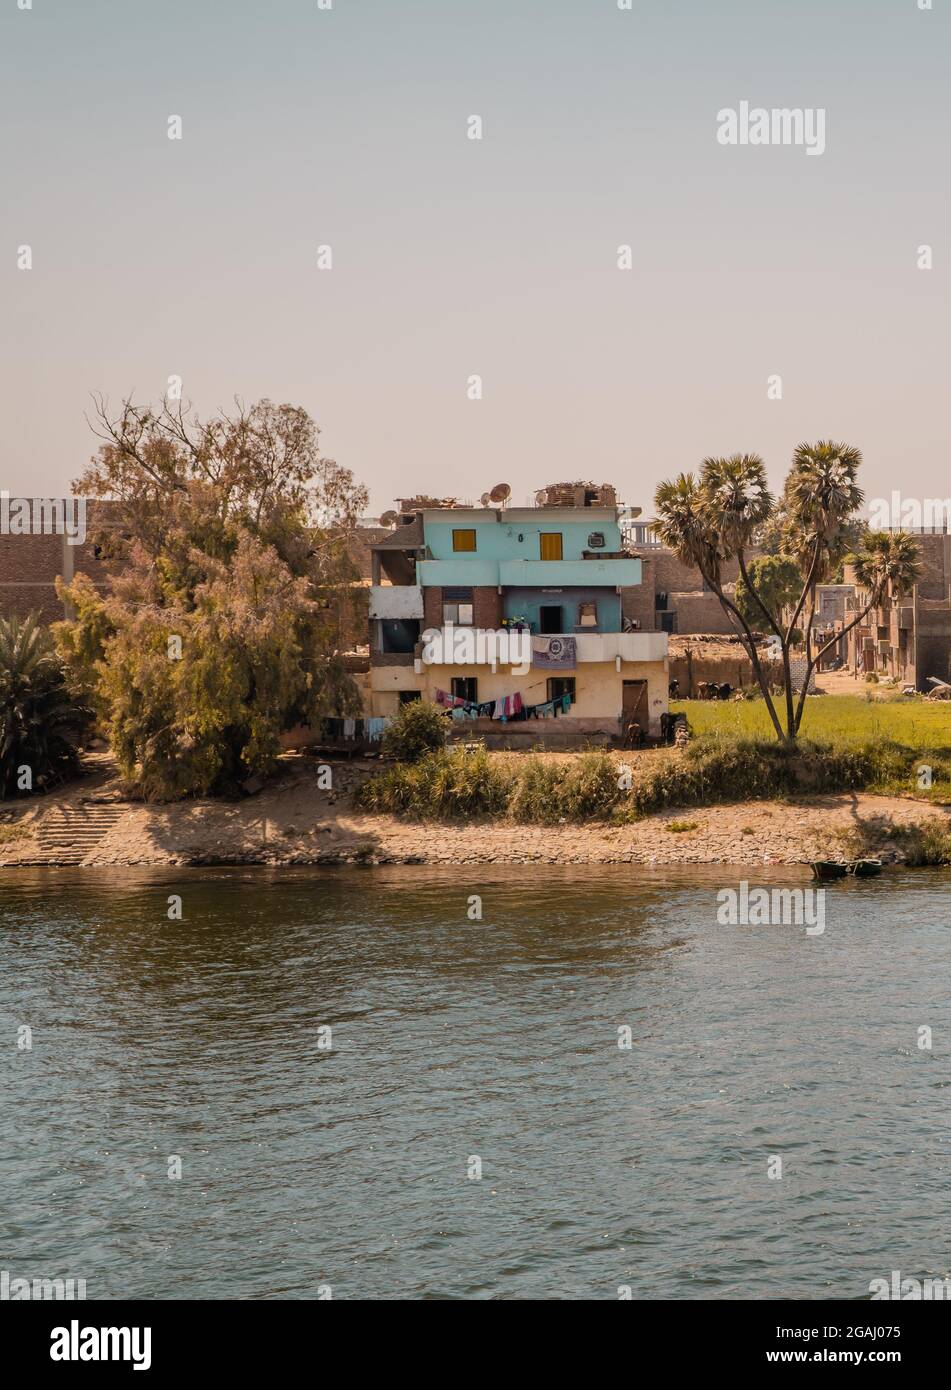 Vegetation and landscapes on the Nile River in Egypt Stock Photo